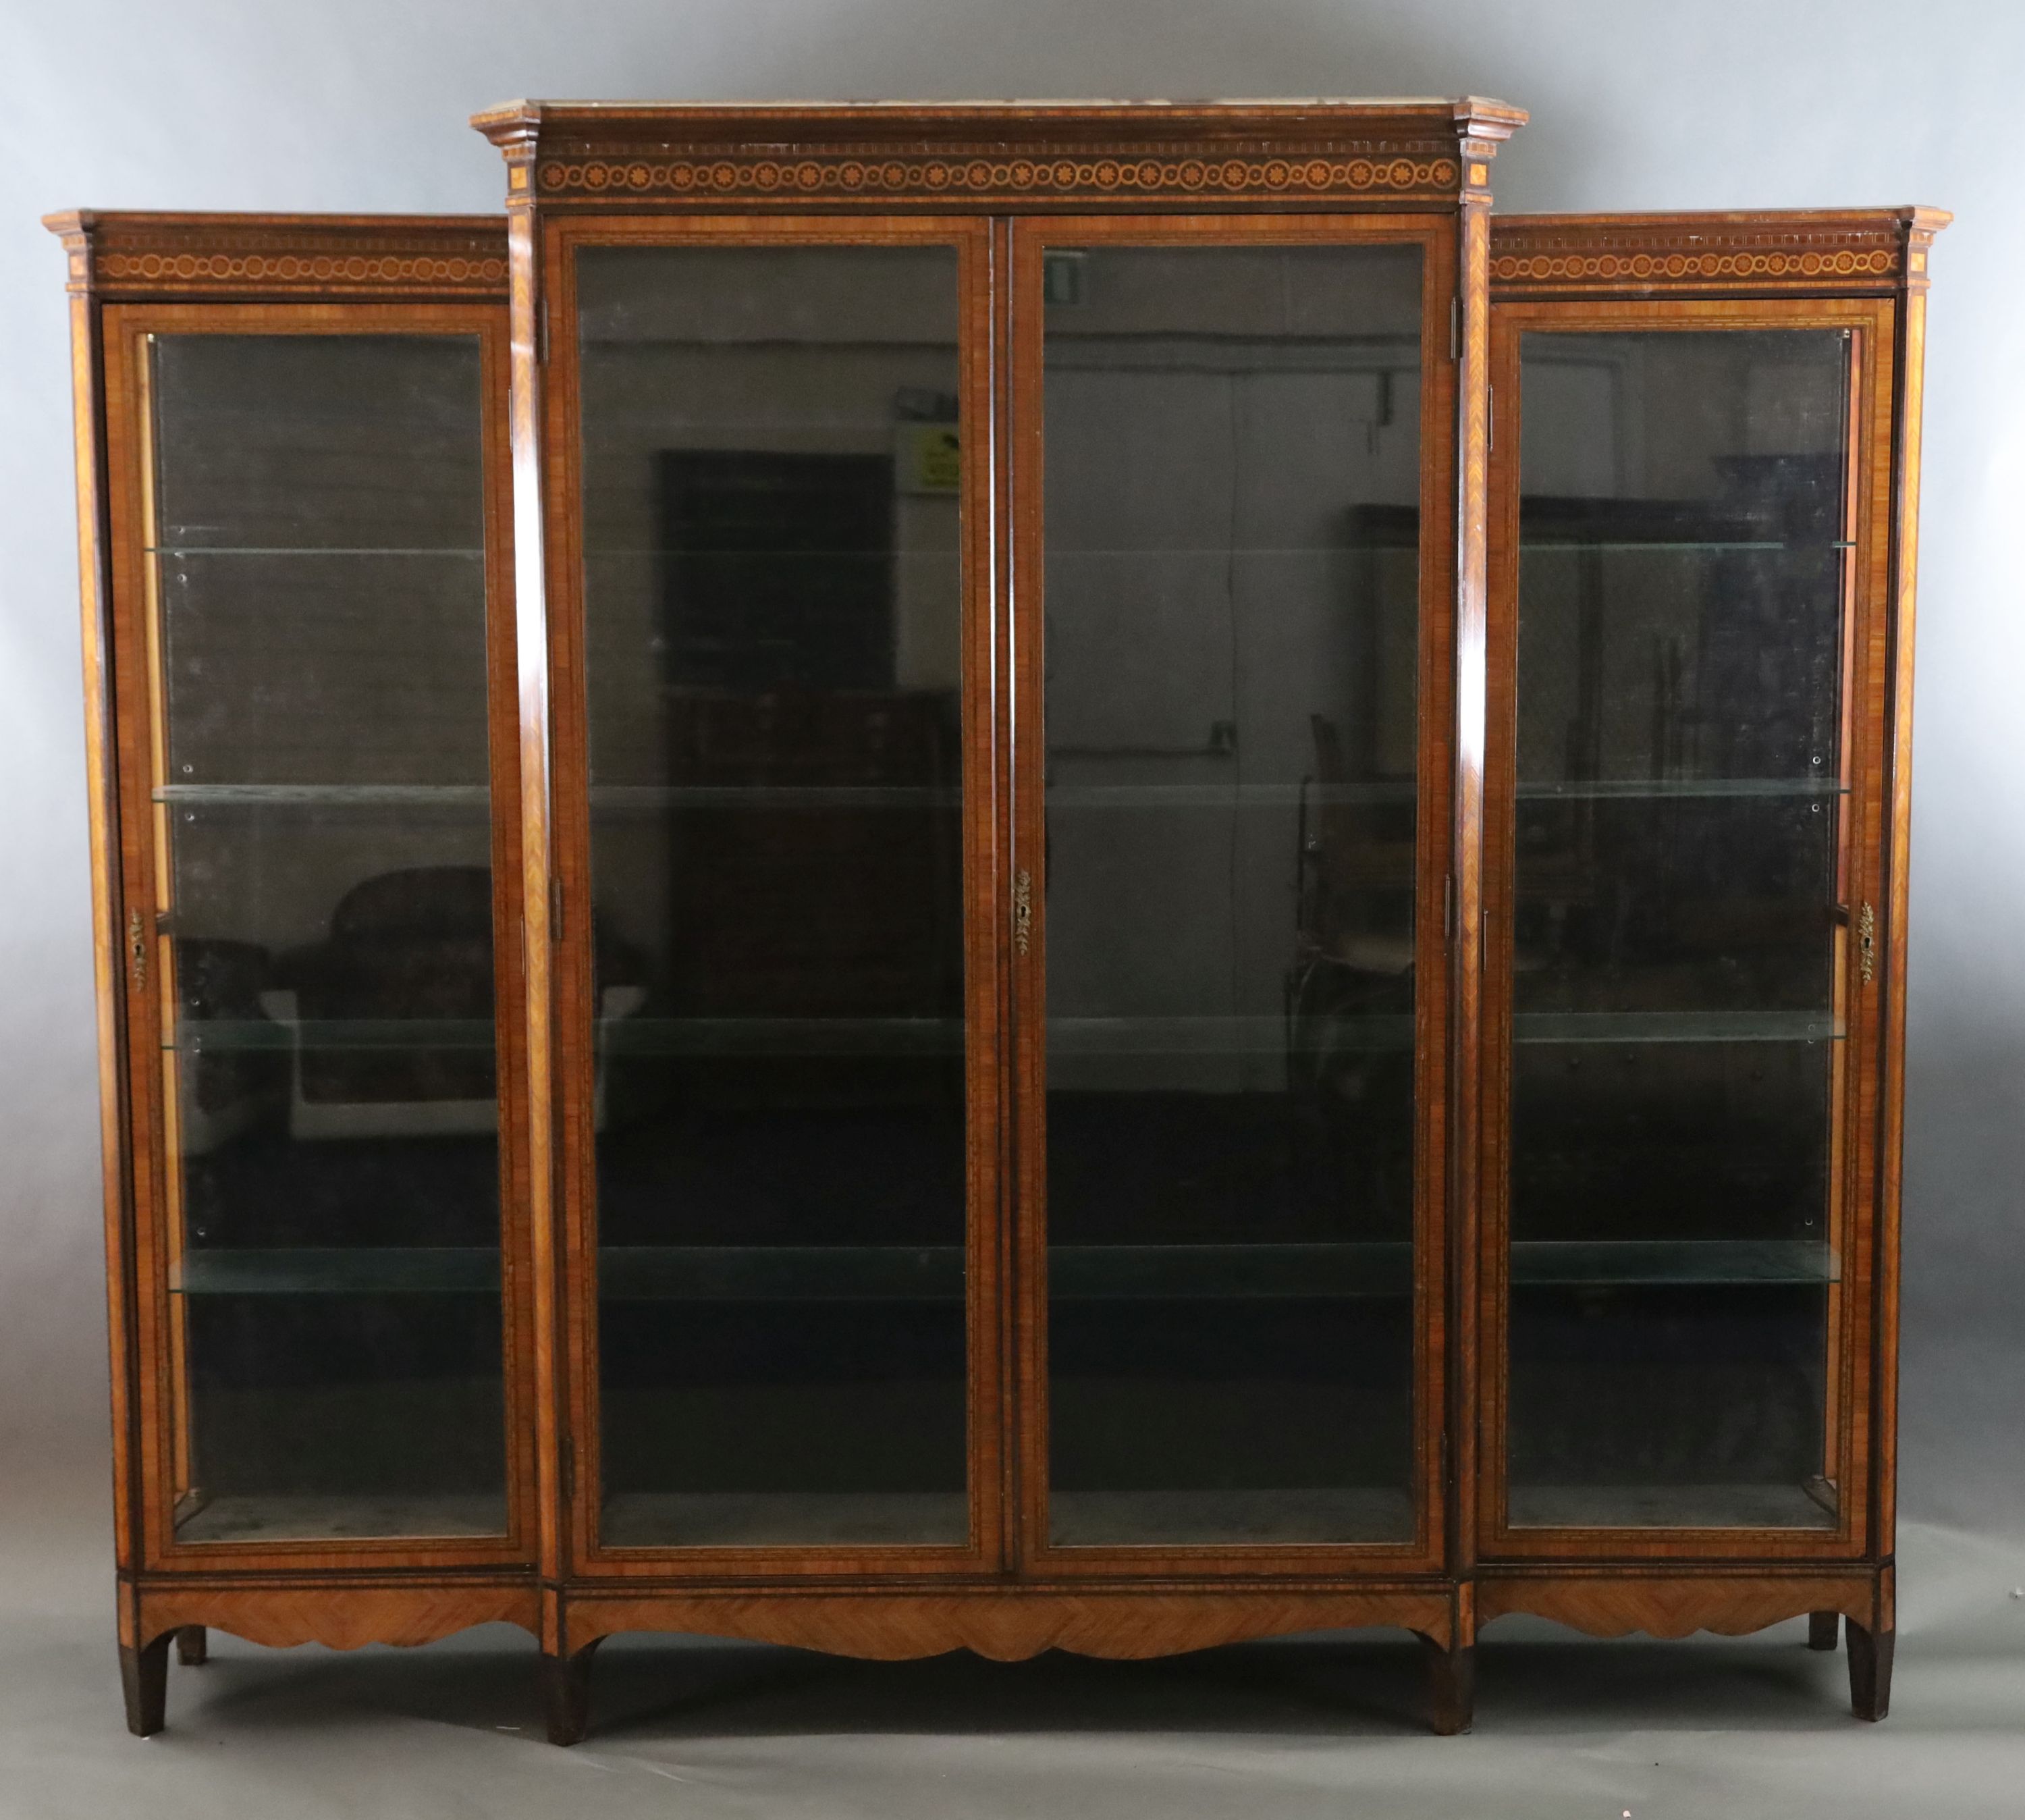 A large 19th century French Louis Philippe period kingwood and marquetry vitrine, W.8ft 4in. D.1ft 5in. H.7ft 4in.